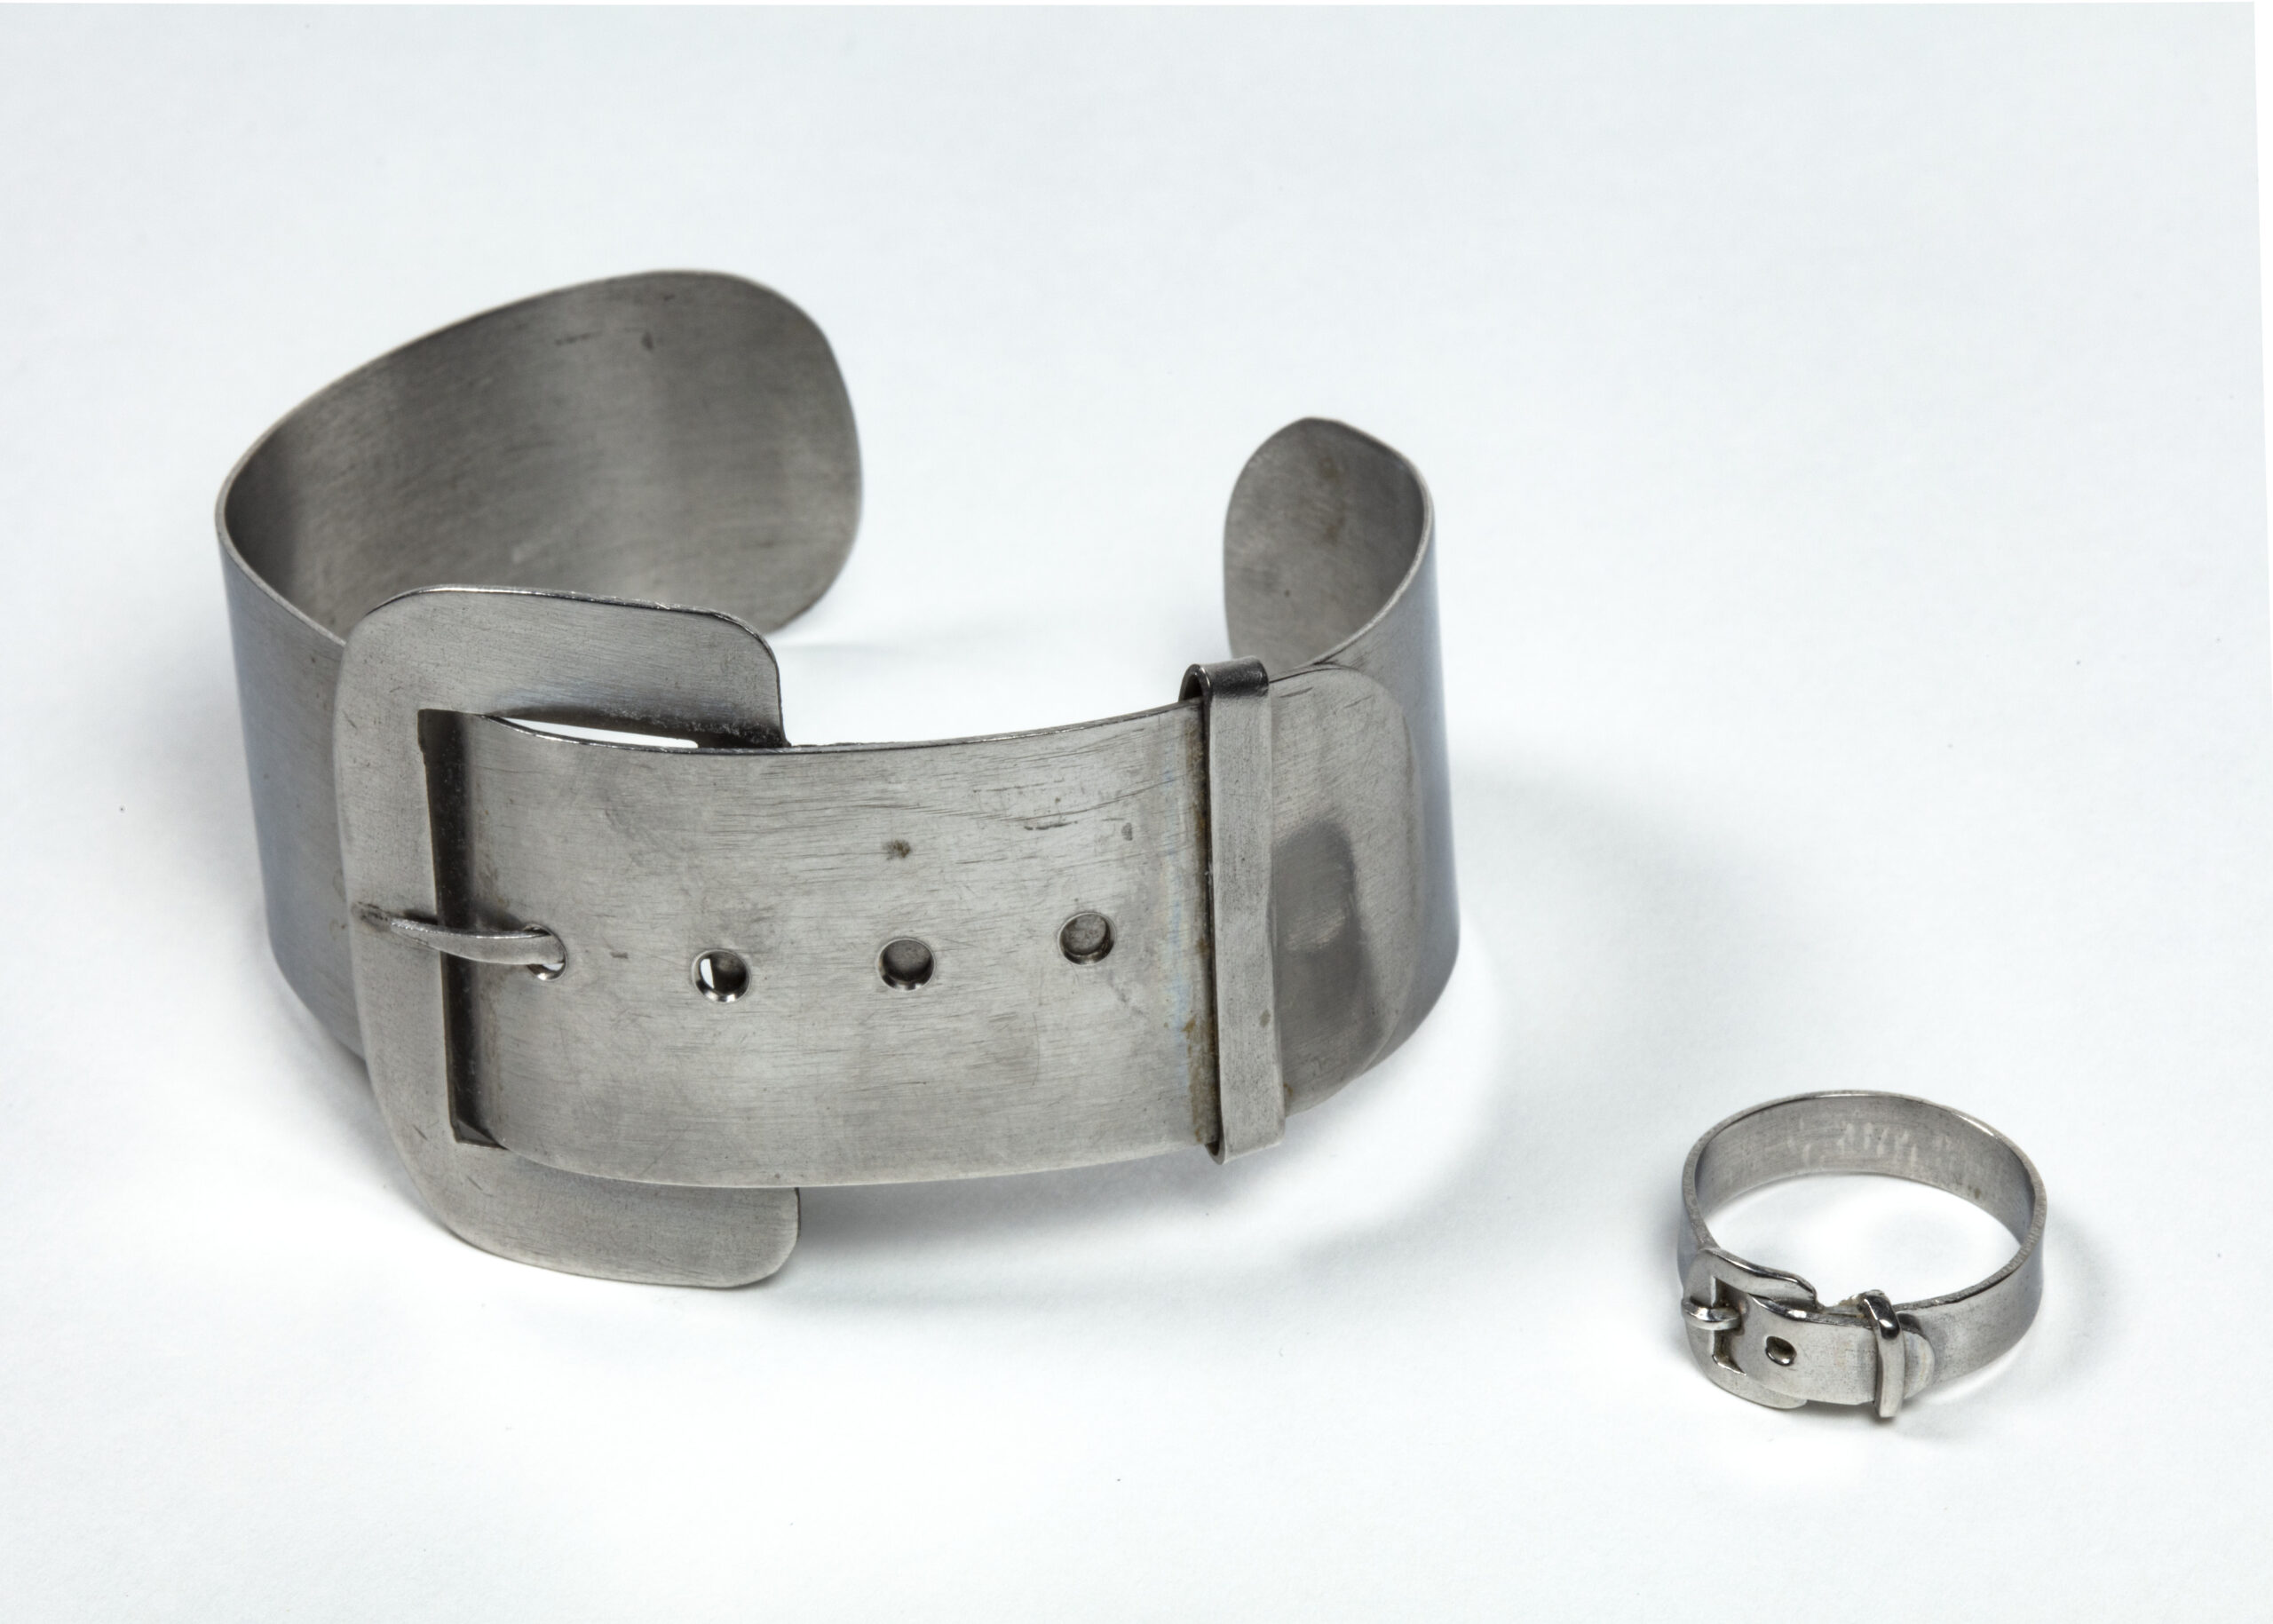 Bracelet and ring, ca. 1943
Nassau or Suffolk County, NY 
Sheet metal
Preservation Long Island purchase, 2002.6ab
